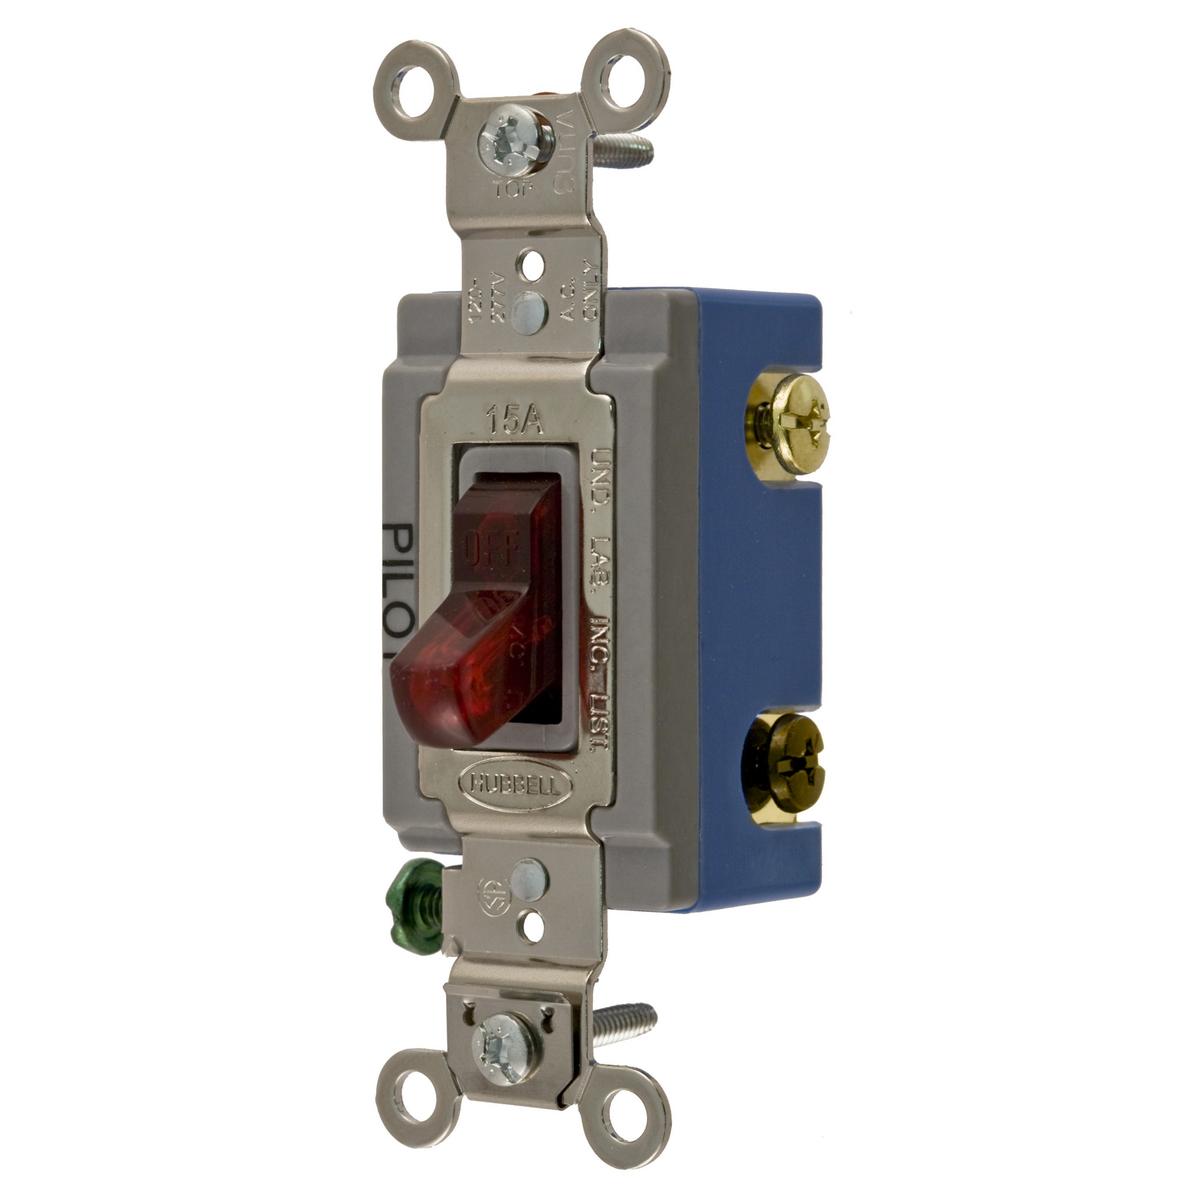 Hubbell HBL1203PL Switches and Lighting Controls, Industrial Grade, Pilot Light Toggle Switches, General Purpose AC, Three Way, 15A 120/277V AC, Back and Side Wired, Red Toggle  ; Large brass binding head screws with deep slots ; Abuse resistant nylon toggle ; Strip gauge 